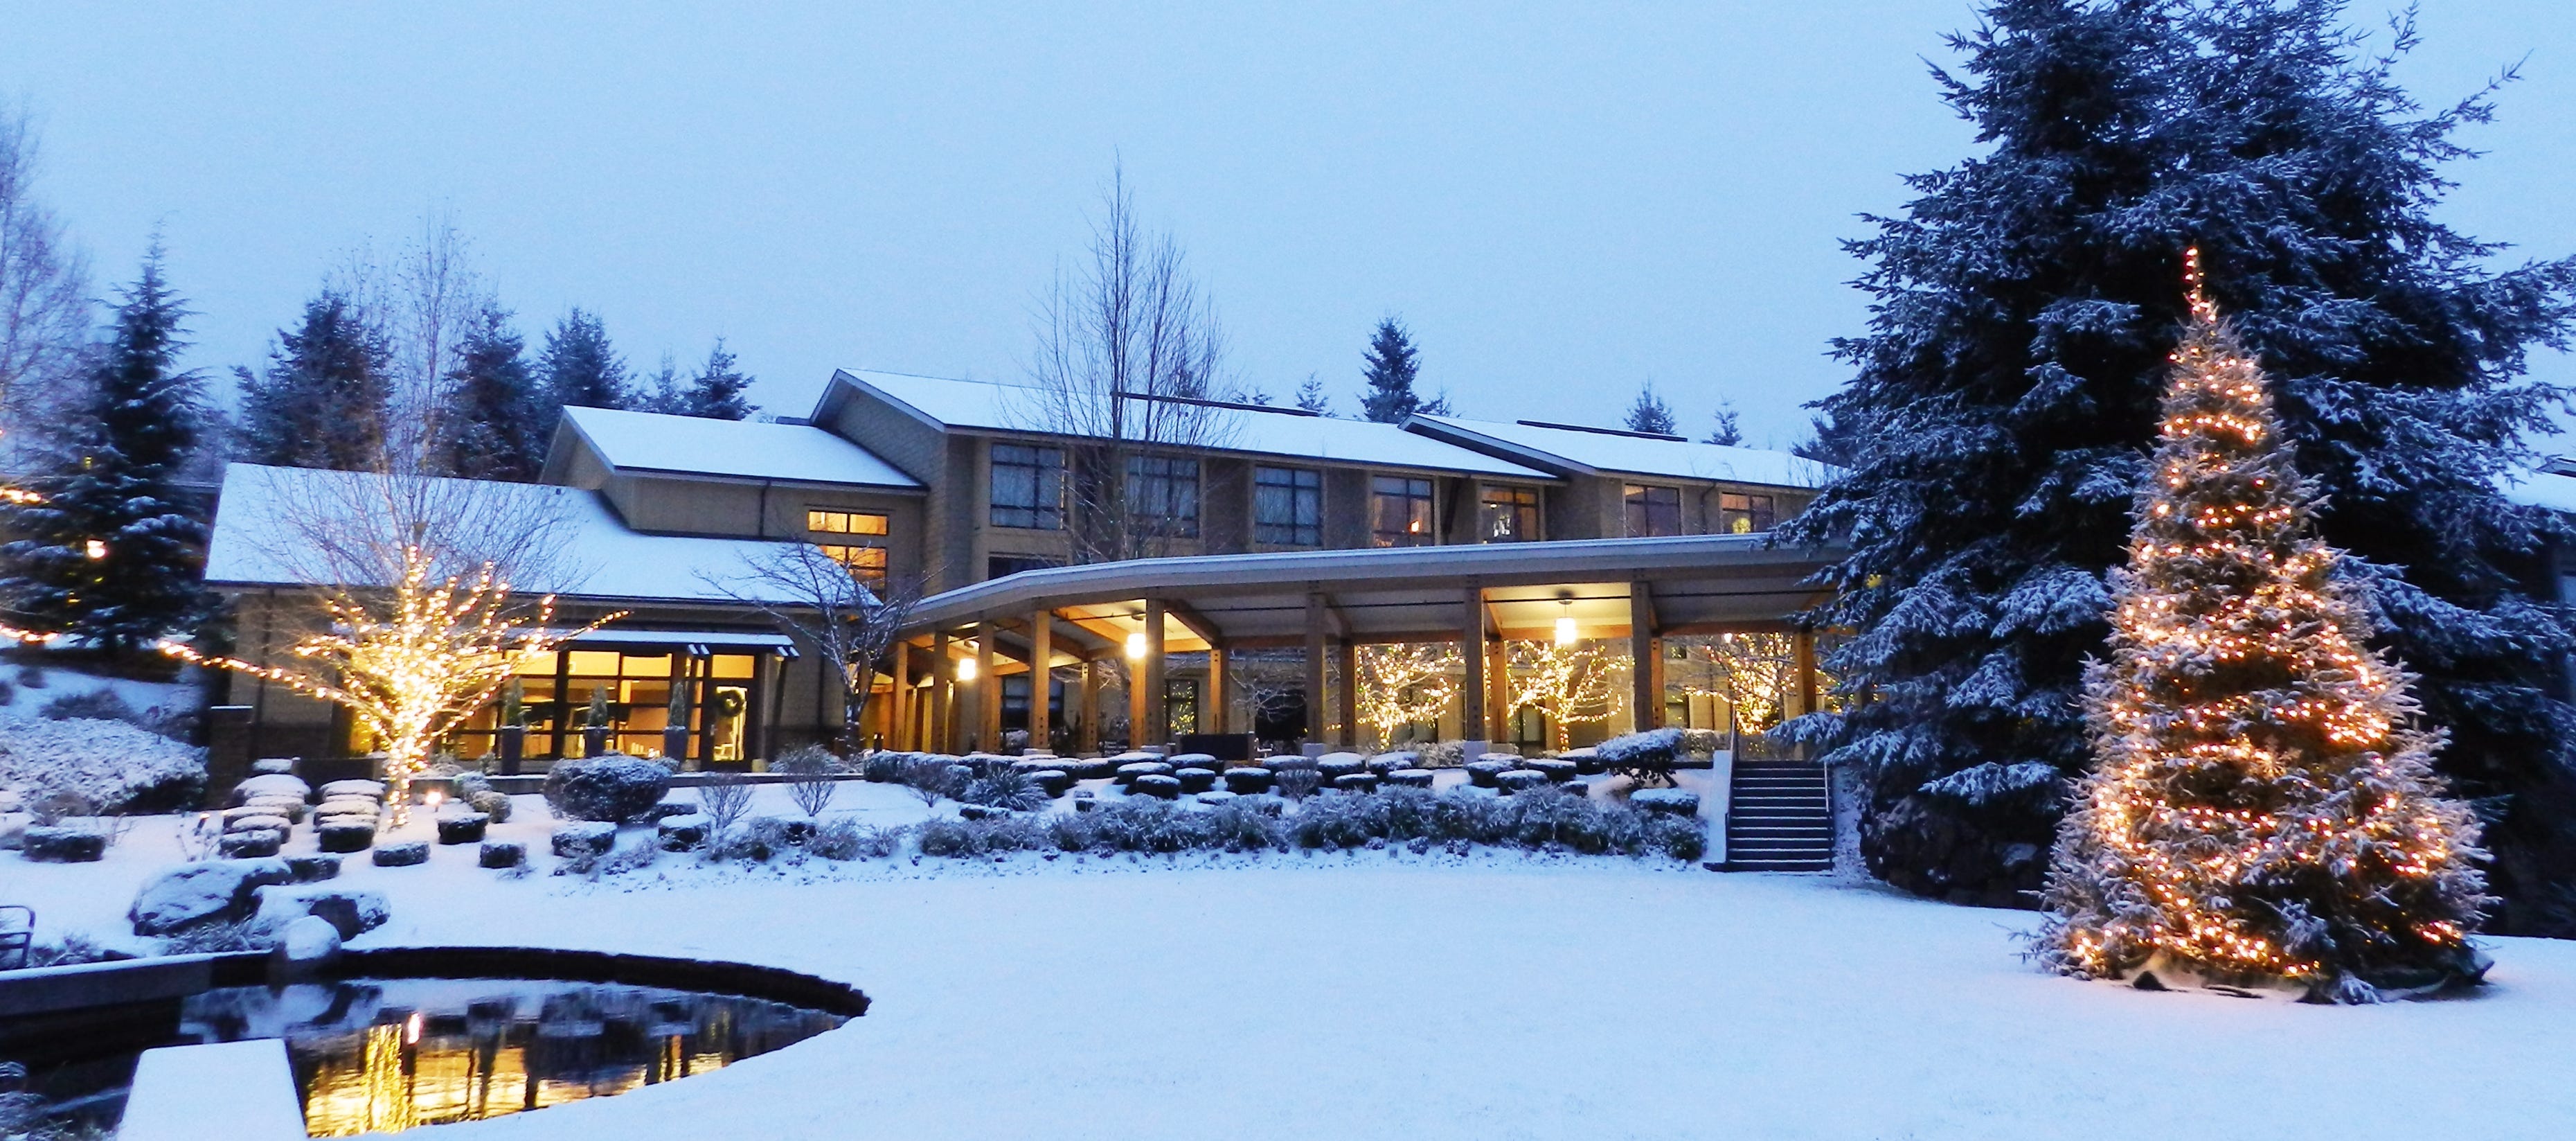 Enjoy a cozy winter retreat at these lodges in Washington